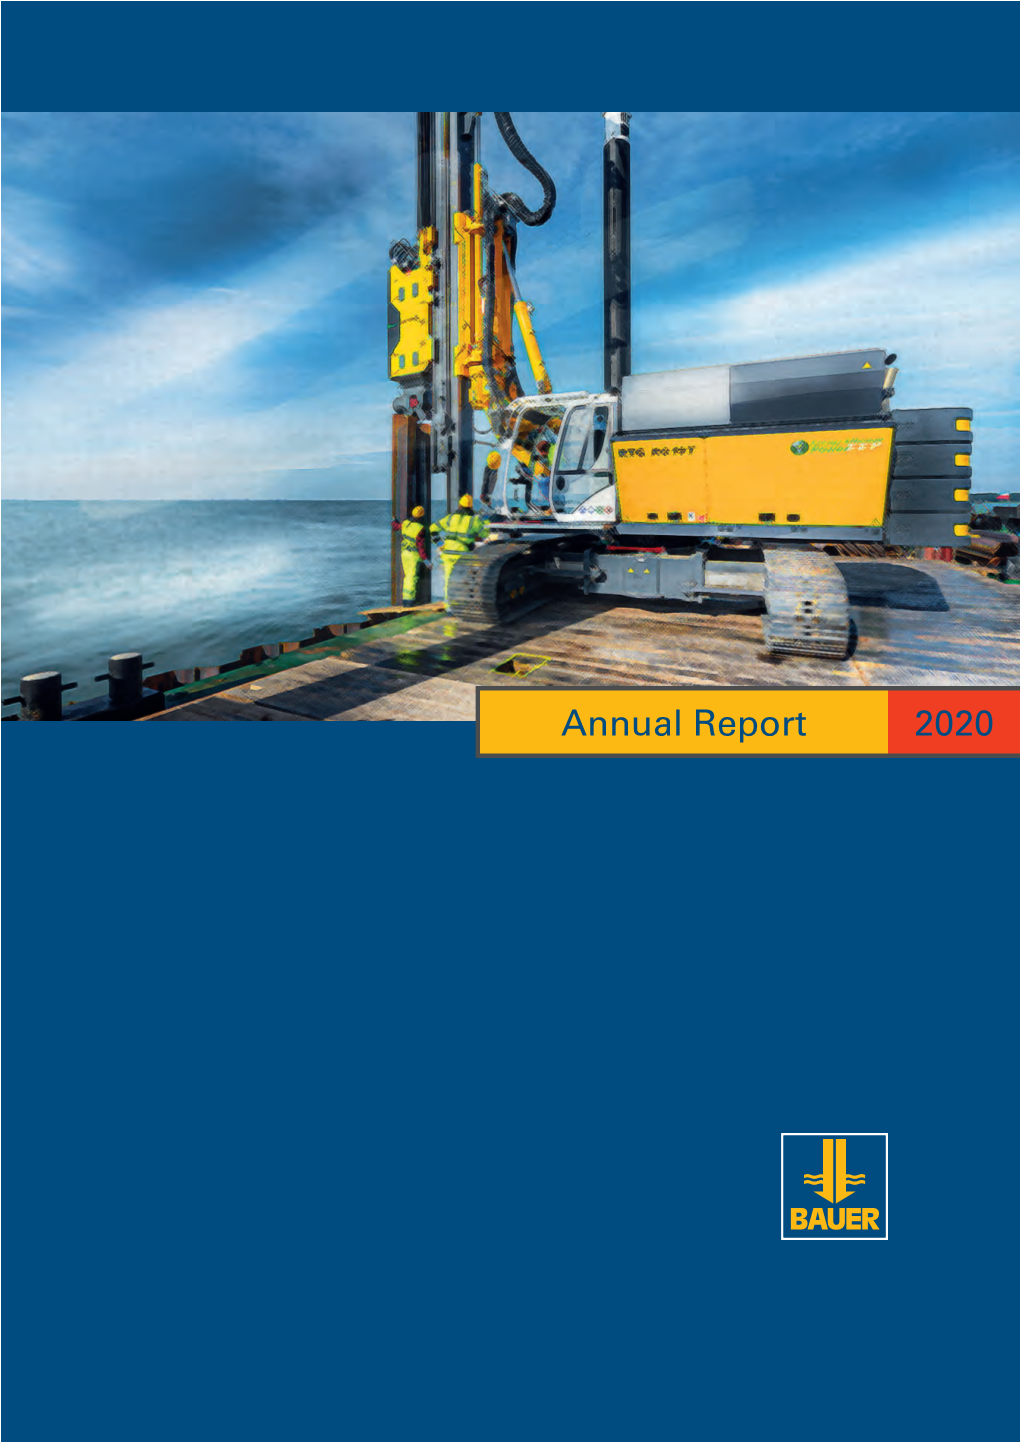 Annual Report 2020 the BAUER Group Is a Leading Provider of Services, Equipment and Products Related to Ground and Groundwater